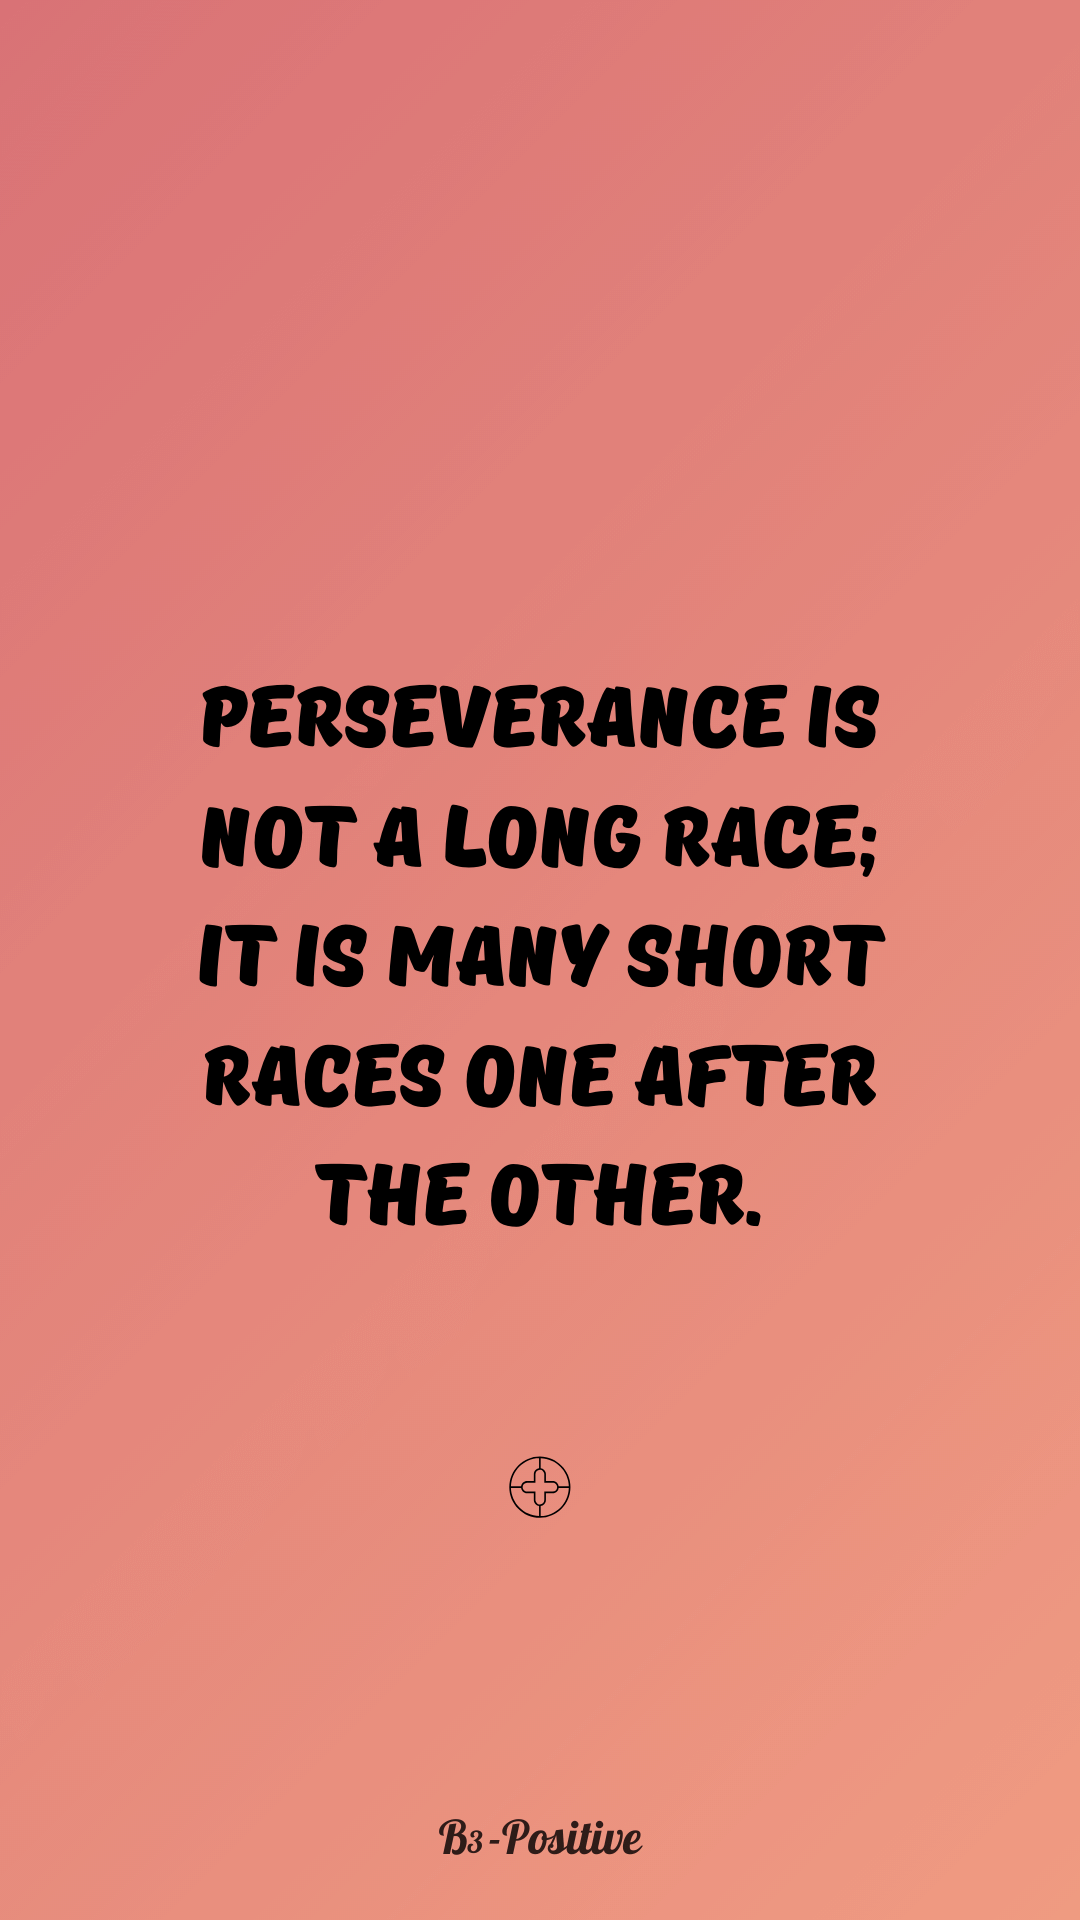 Perseverance Quotes Wallpaper for Phone